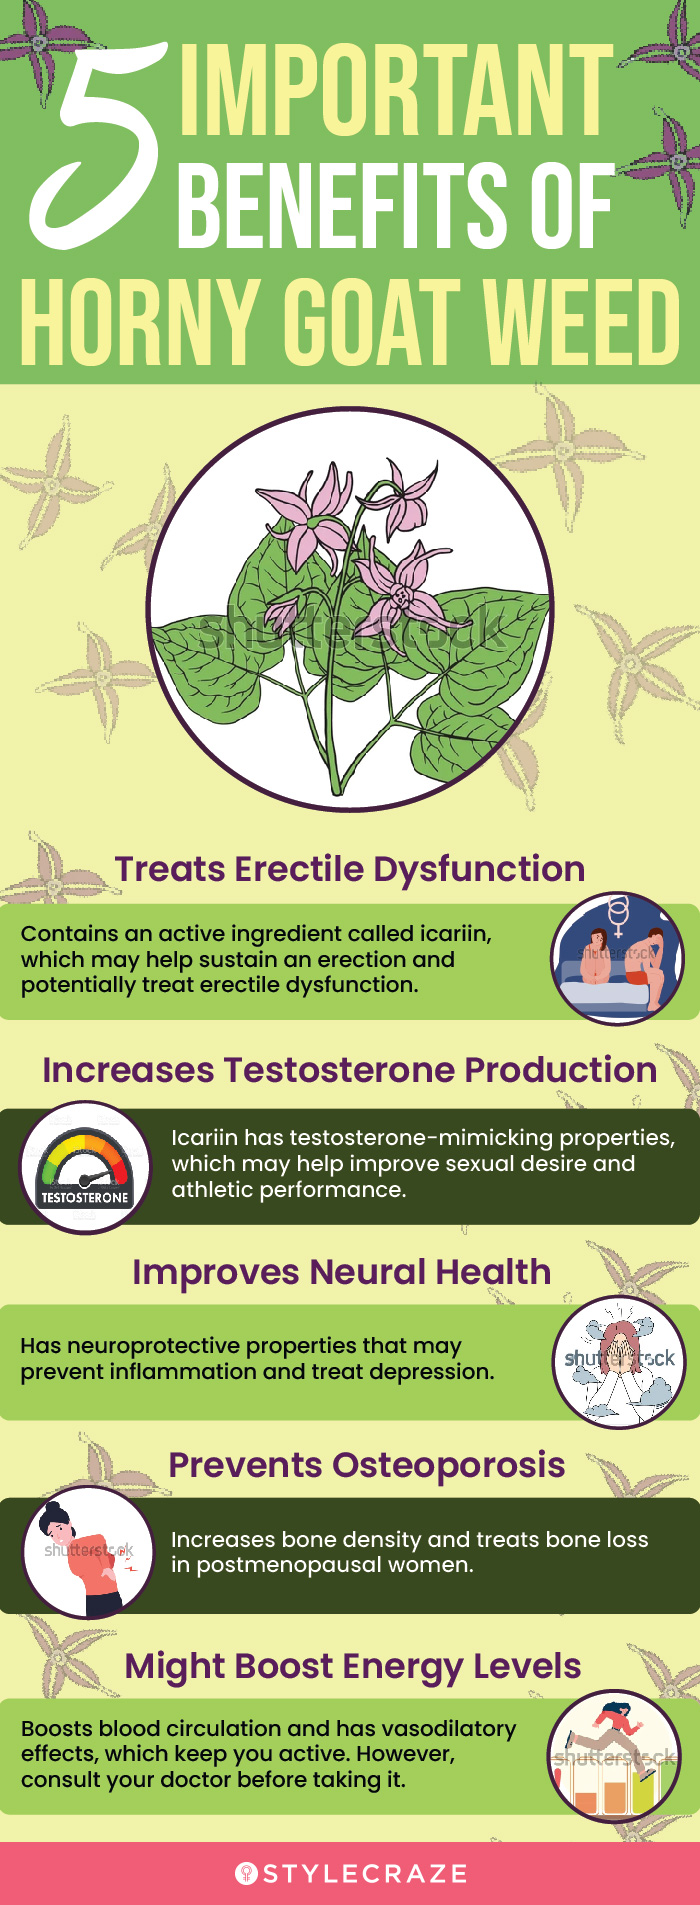 5 important benefits of horny goat weed (infographic)